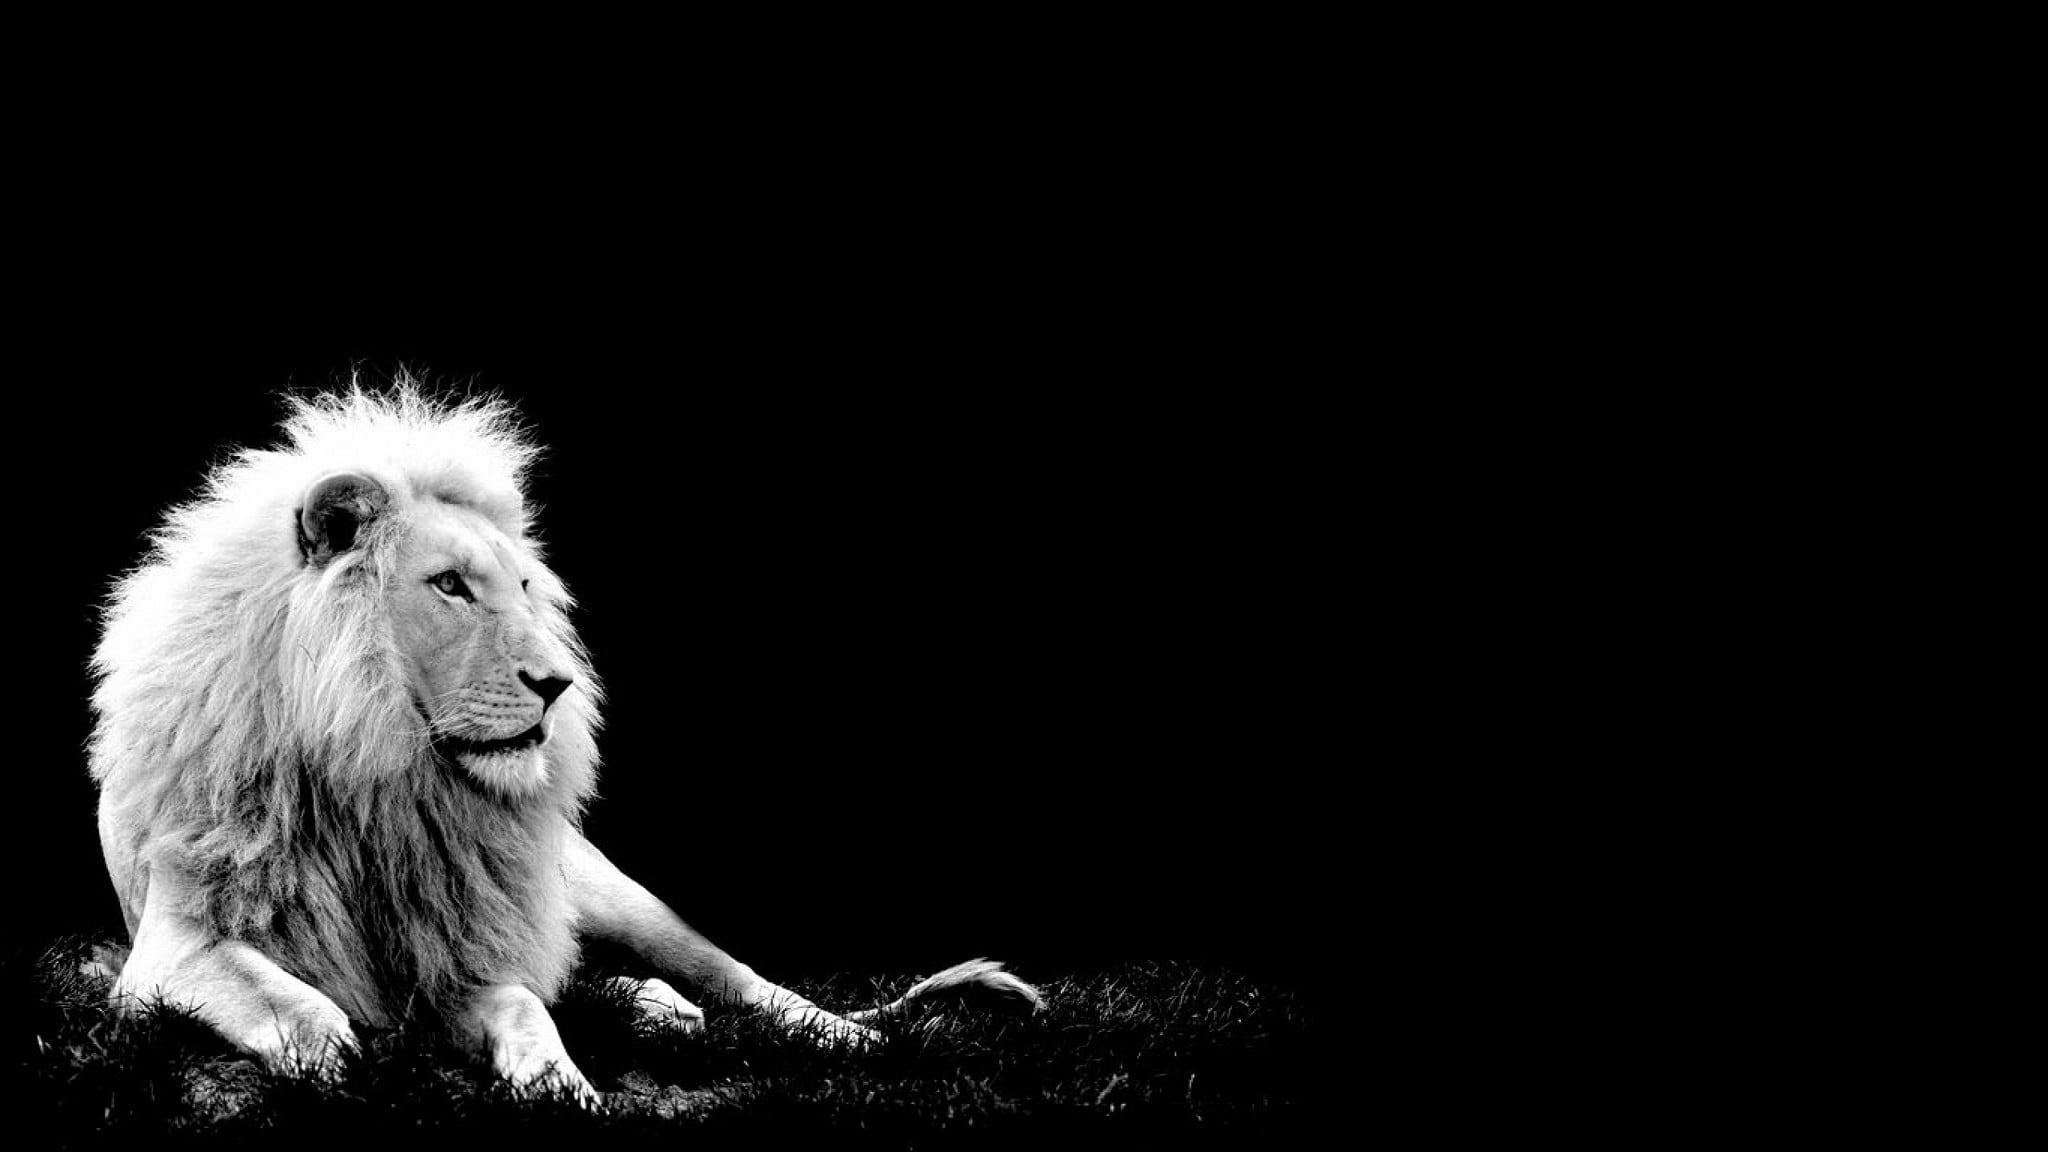 Abstract Lion Wallpaper - It's Better To Live One Day - HD Wallpaper 